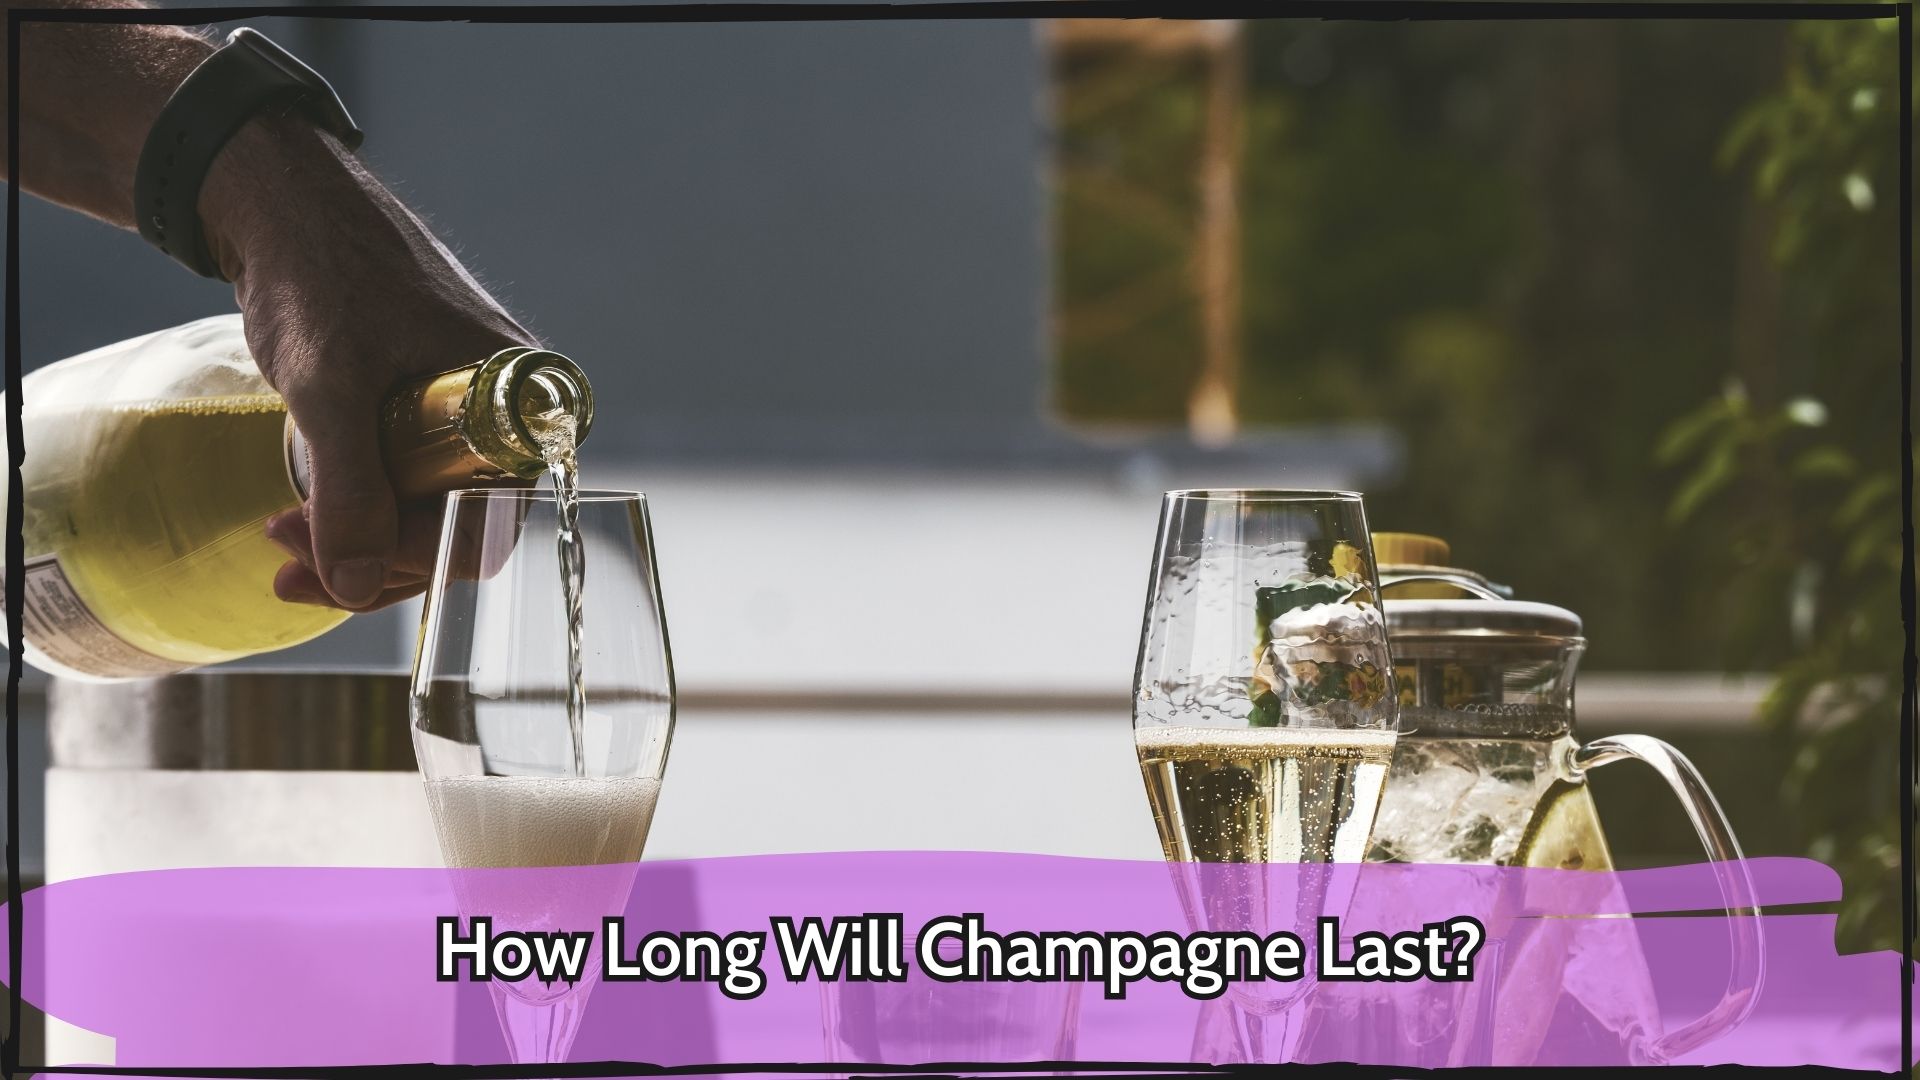 How Long Will Champagne Last?